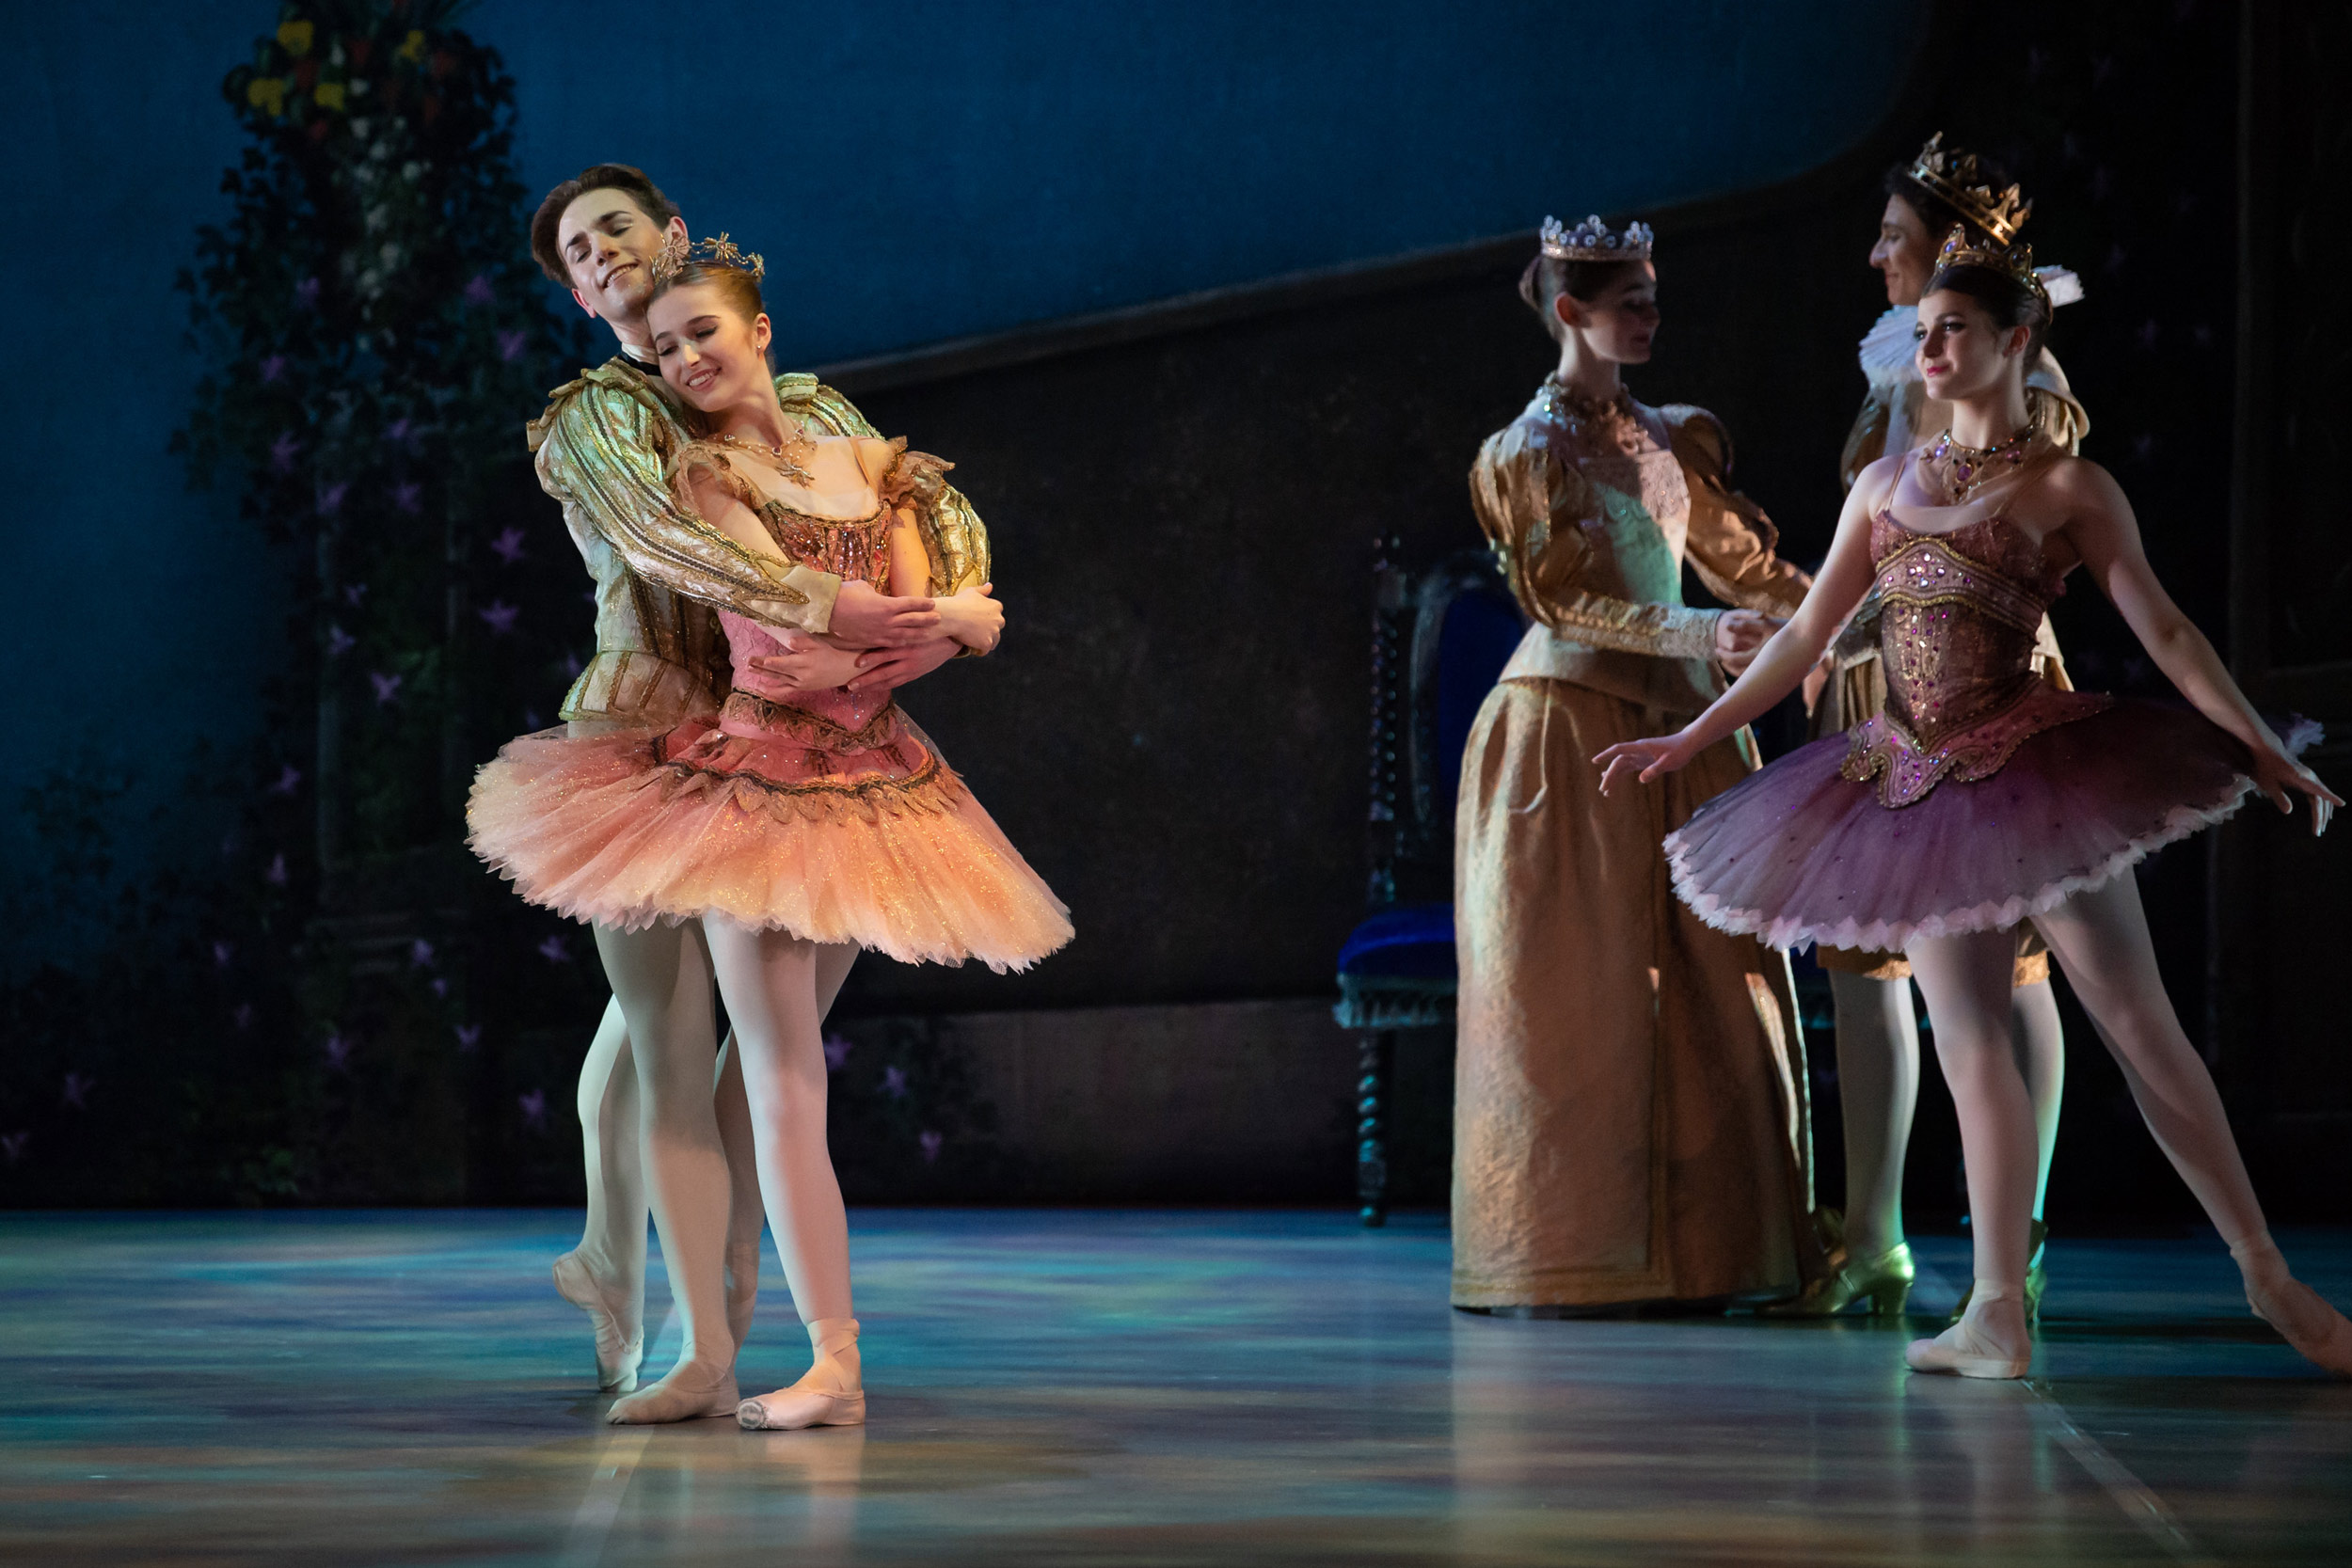 Eric Snyder as Prince Désiré and Evelina Andersson as Princess Aurora in My First Ballet: Sleeping Beauty © Photography by ASH